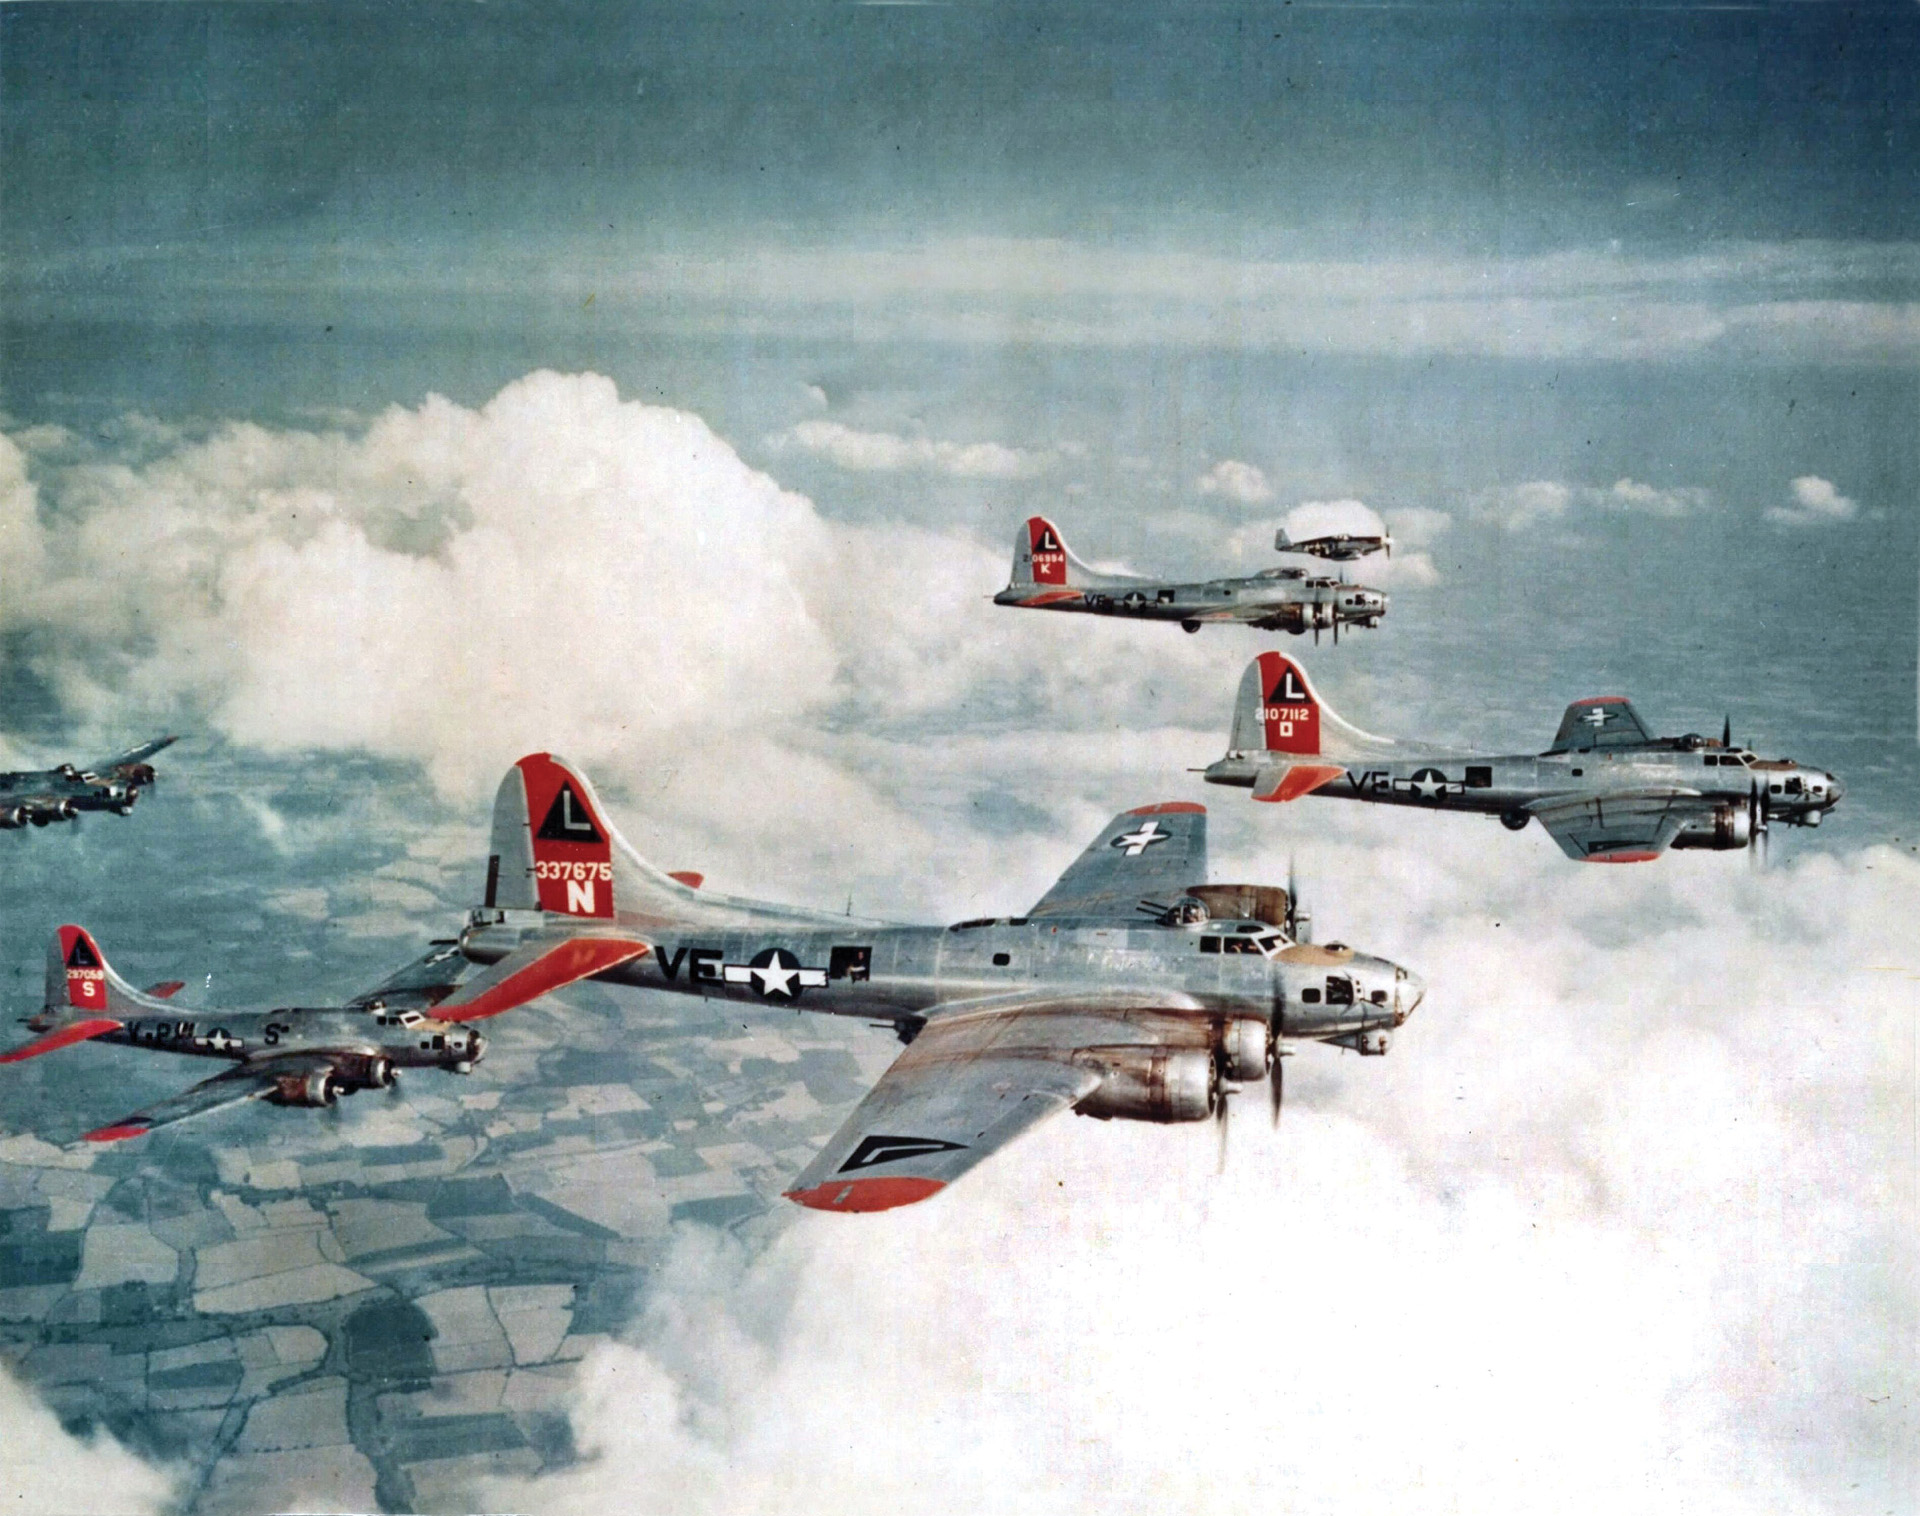 A P-51 Mustang (top) can be seen escorting a flight of B-17s from the 452nd Bomb Group on a mission deep into Nazi Germany. The introduction of P-51 escorts permitted long-range missions into the Third Reich.